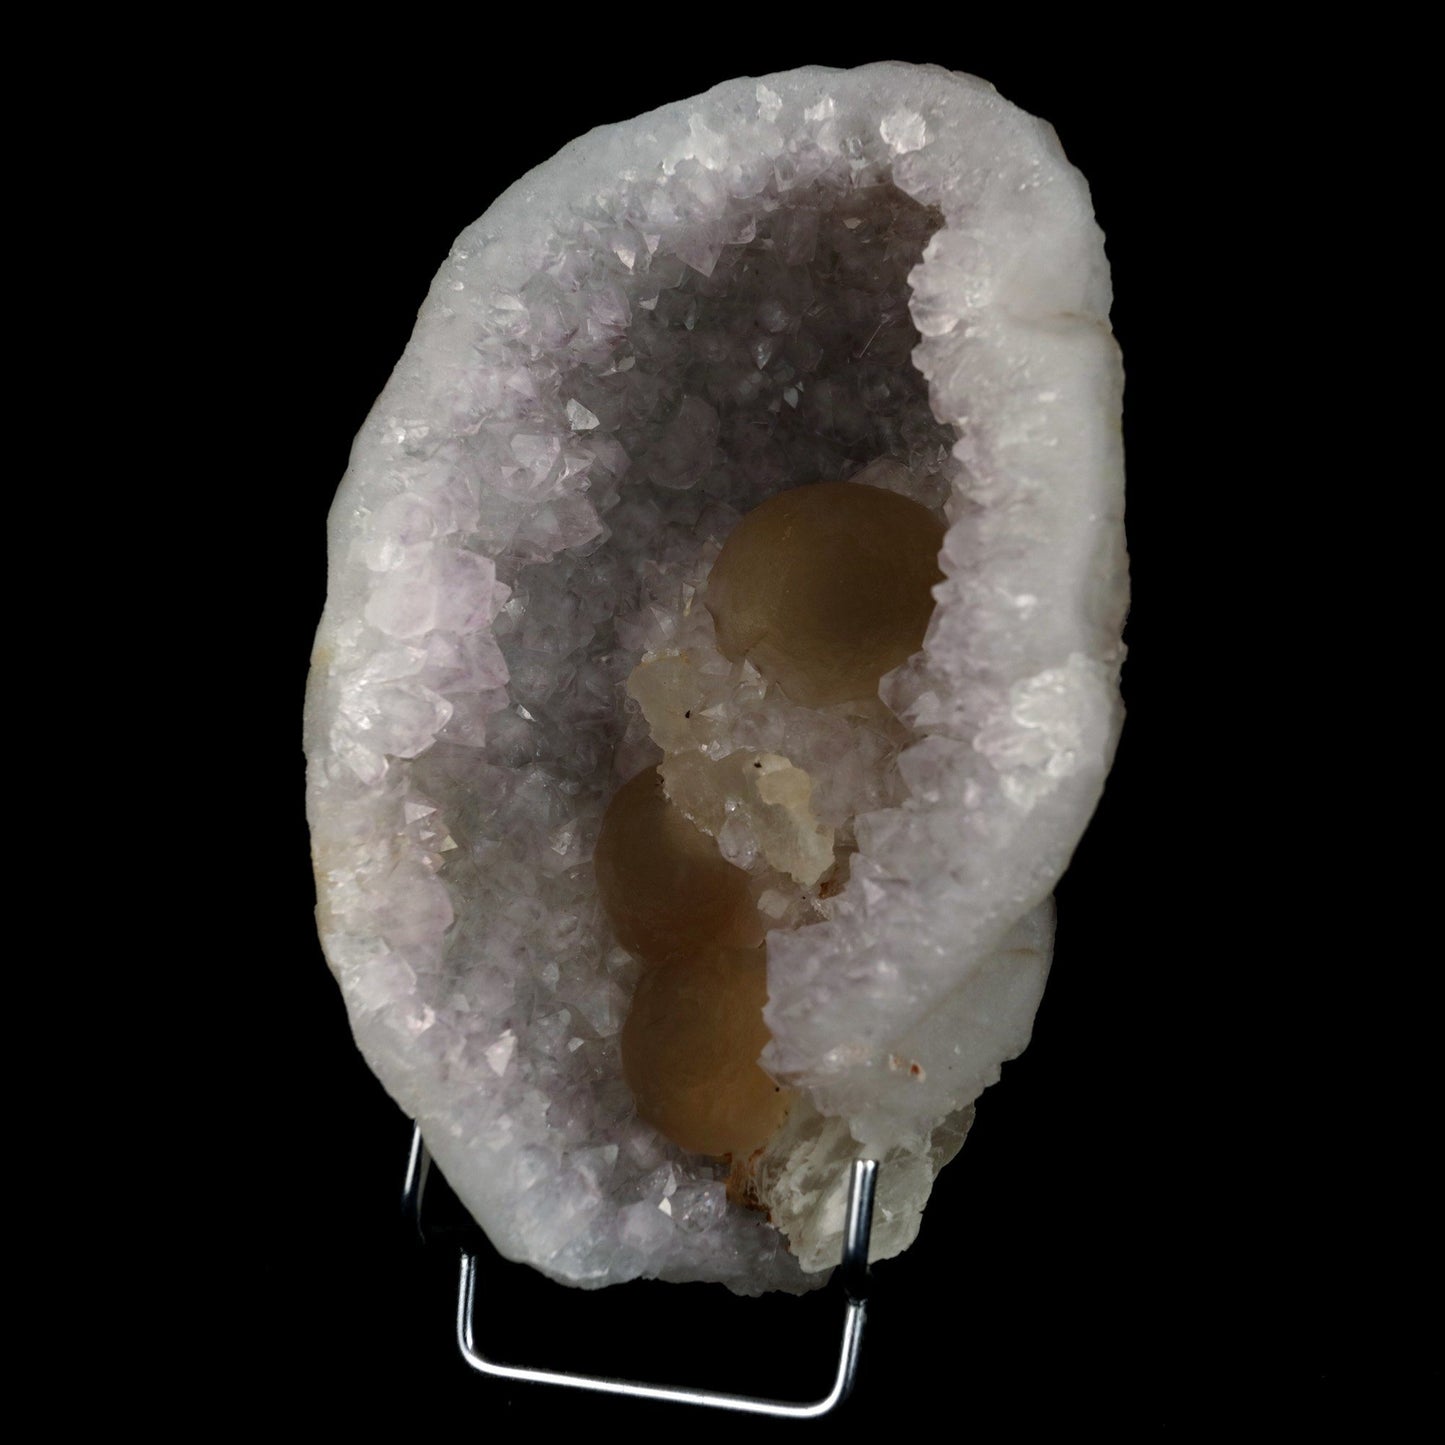 Fluorite Botryoidal on MM Quartz Natural Mineral Specimen # B 4703  https://www.superbminerals.us/products/fluorite-botryoidal-on-mm-quartz-natural-mineral-specimen-b-4703  Features: Translucent Quartz on a tiny scale allowing an excellent side of the equator of yellow Fluorites. Yellow Fluorites circles are more difficult to get, and this one is comparable to what they get for the size. Primary Mineral(s): FluoriteSecondary Mineral(s): N/AMatrix: MM Quartz17 cm x 10 cm Weight : 1250